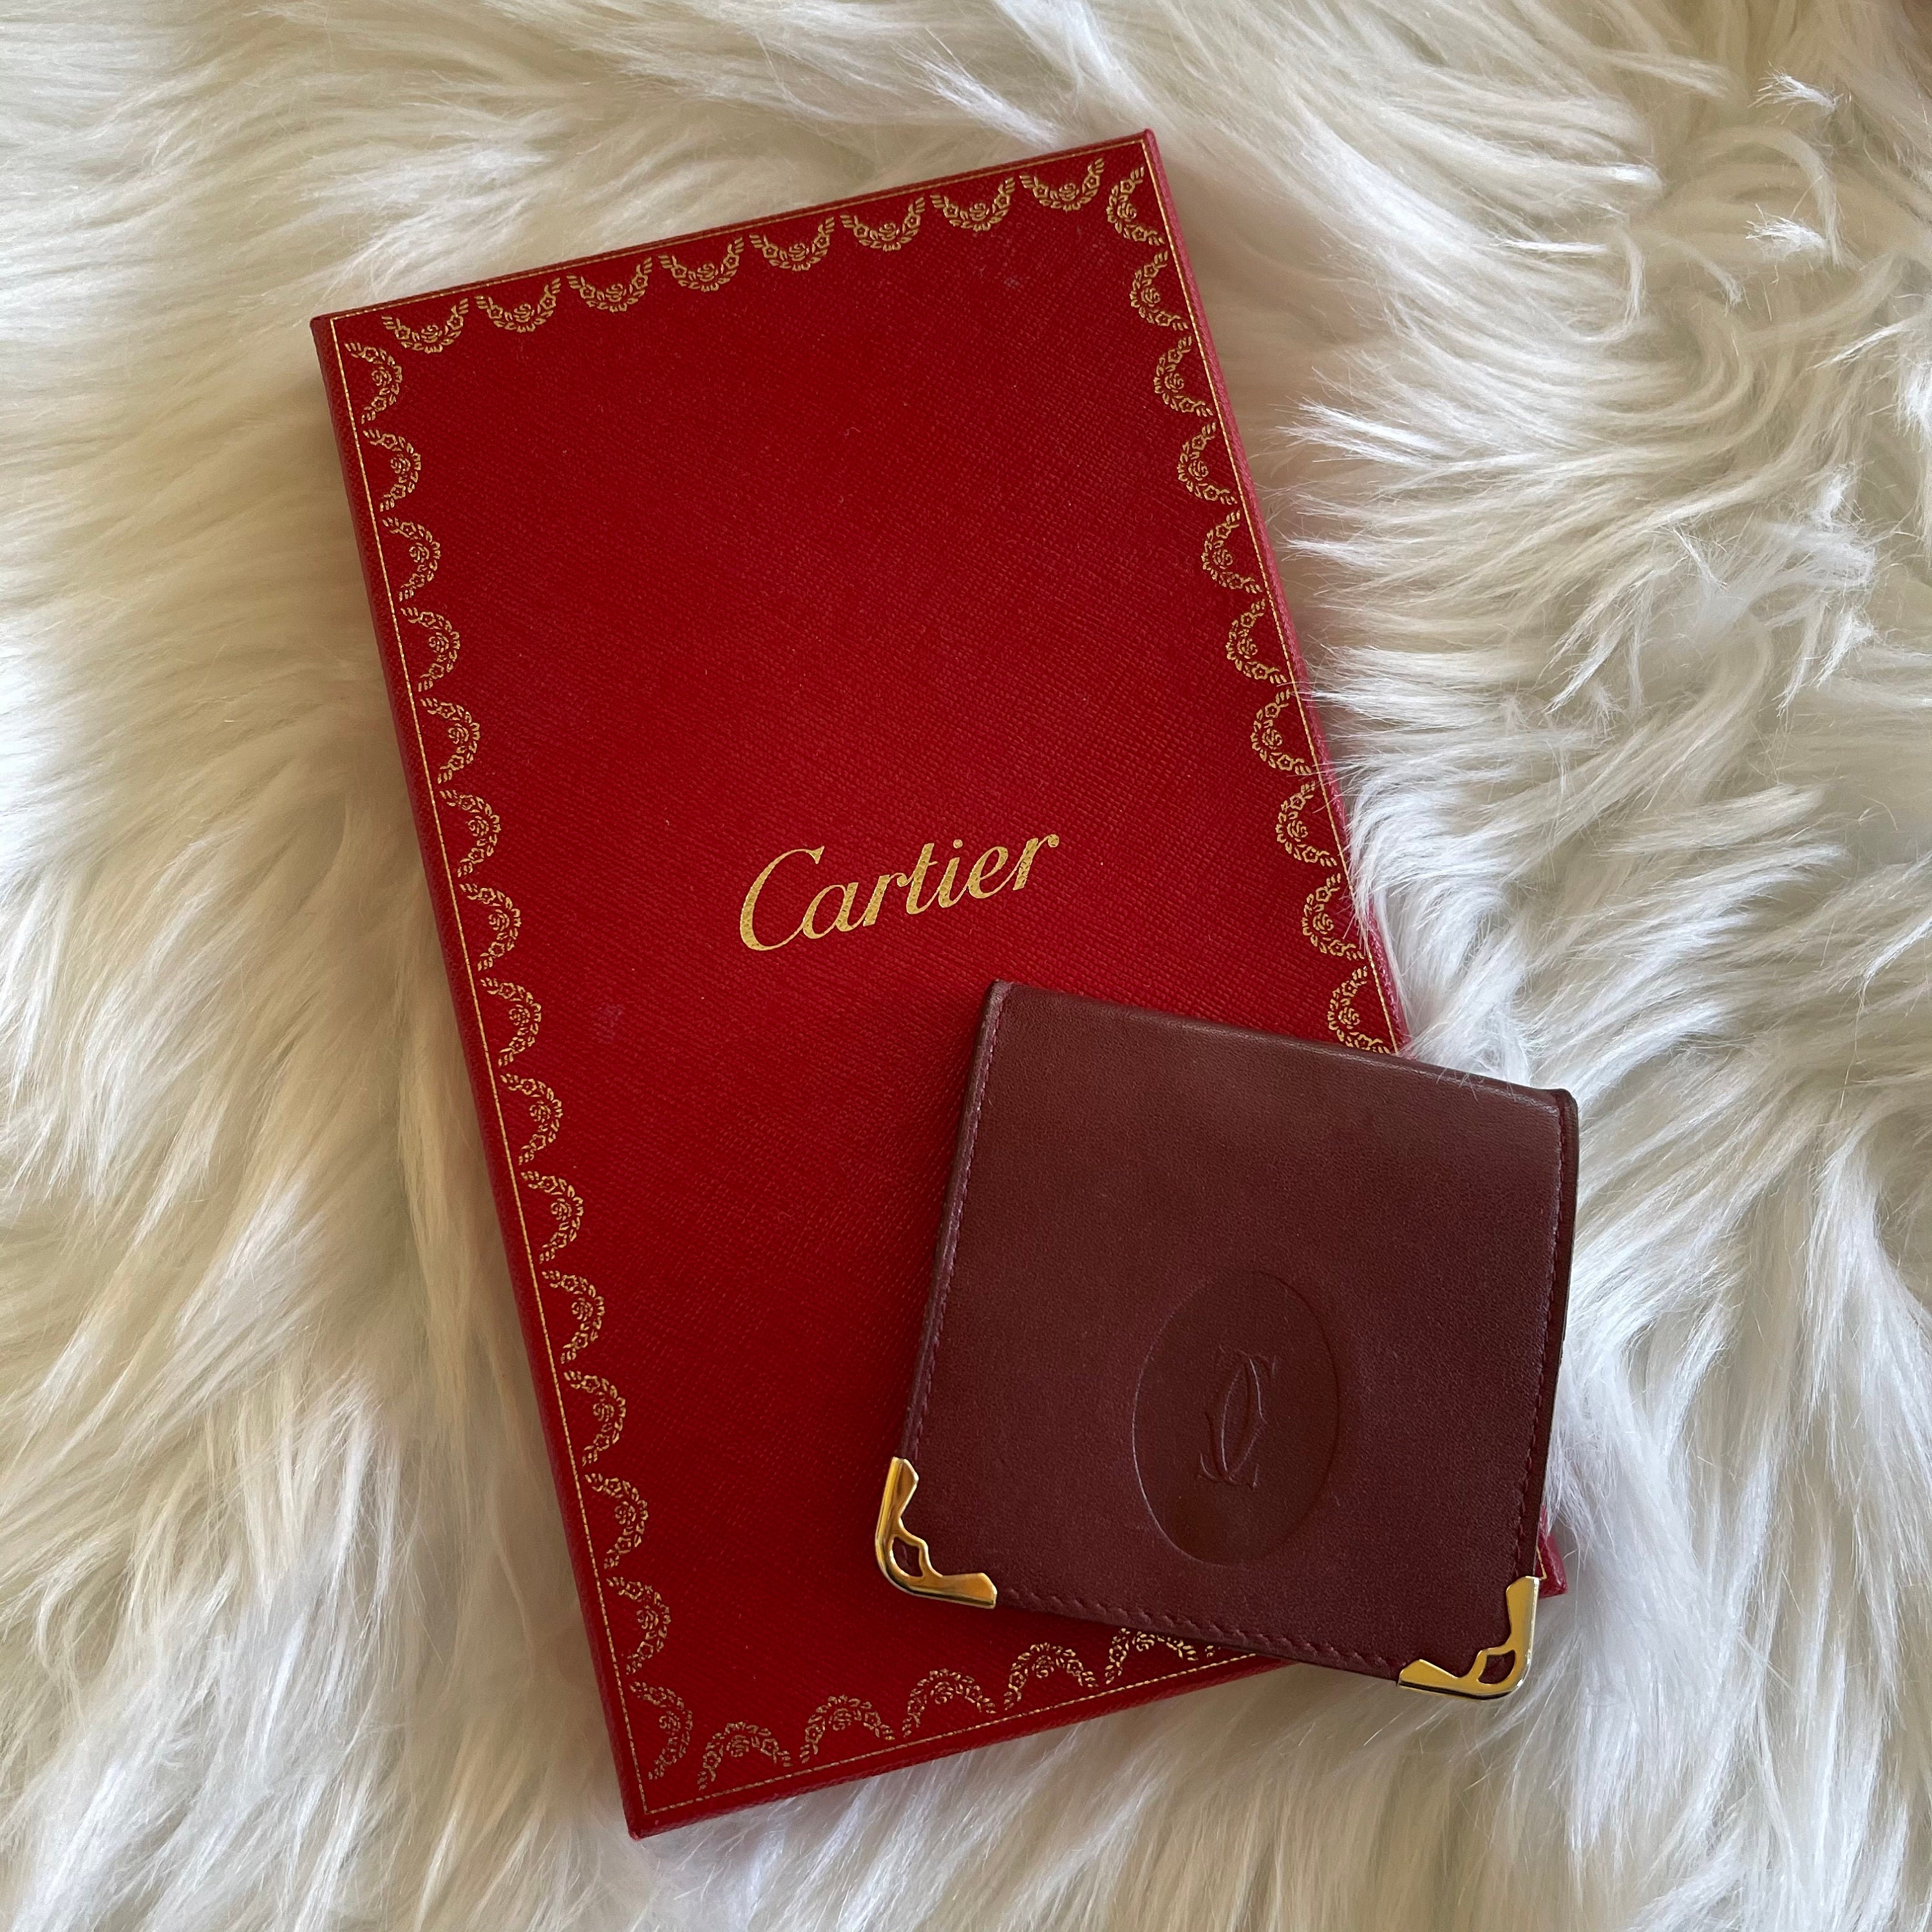 Cartier Watch Pouch - Etsy Norway